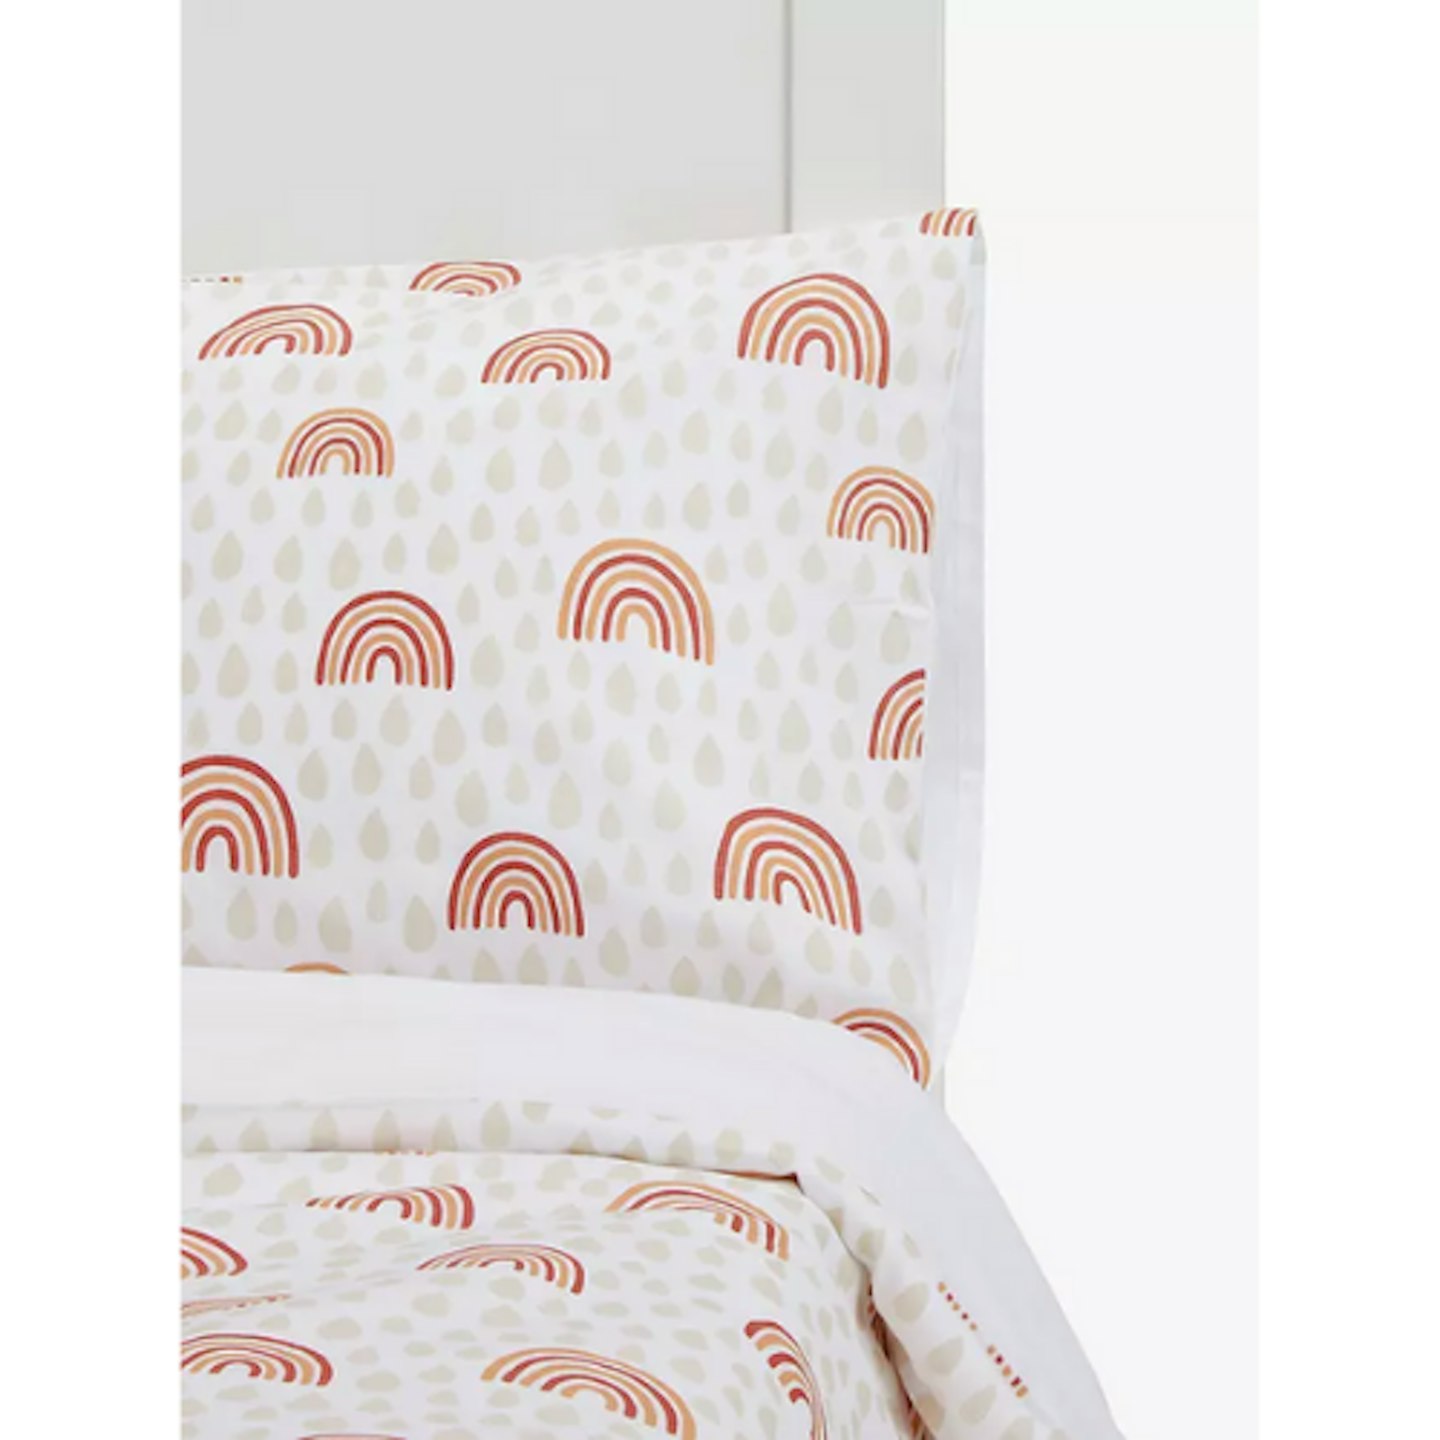 ANYDAY John Lewis & Partners Rainbow Print Cot Duvet Cover and Pillowcase Set